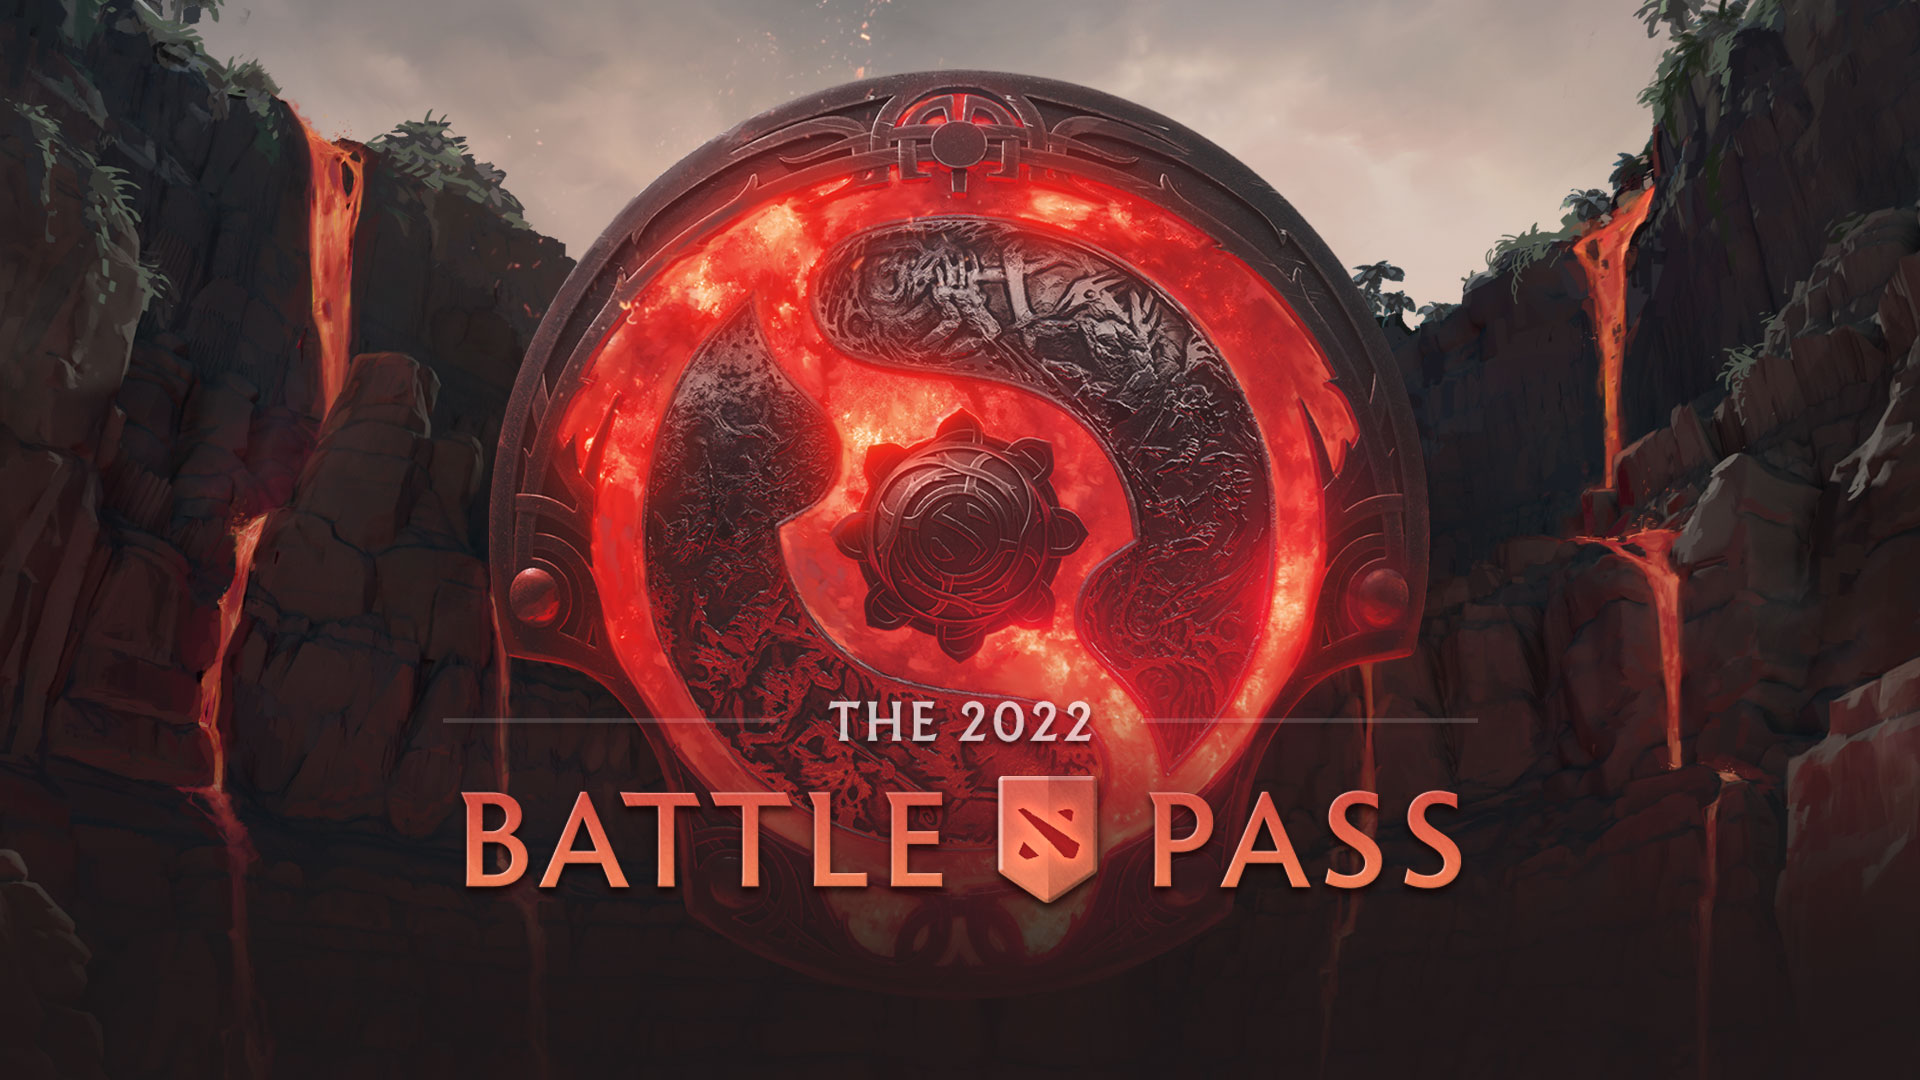 Dota 2 Generated Almost $300 Million from Battle Pass in
2022